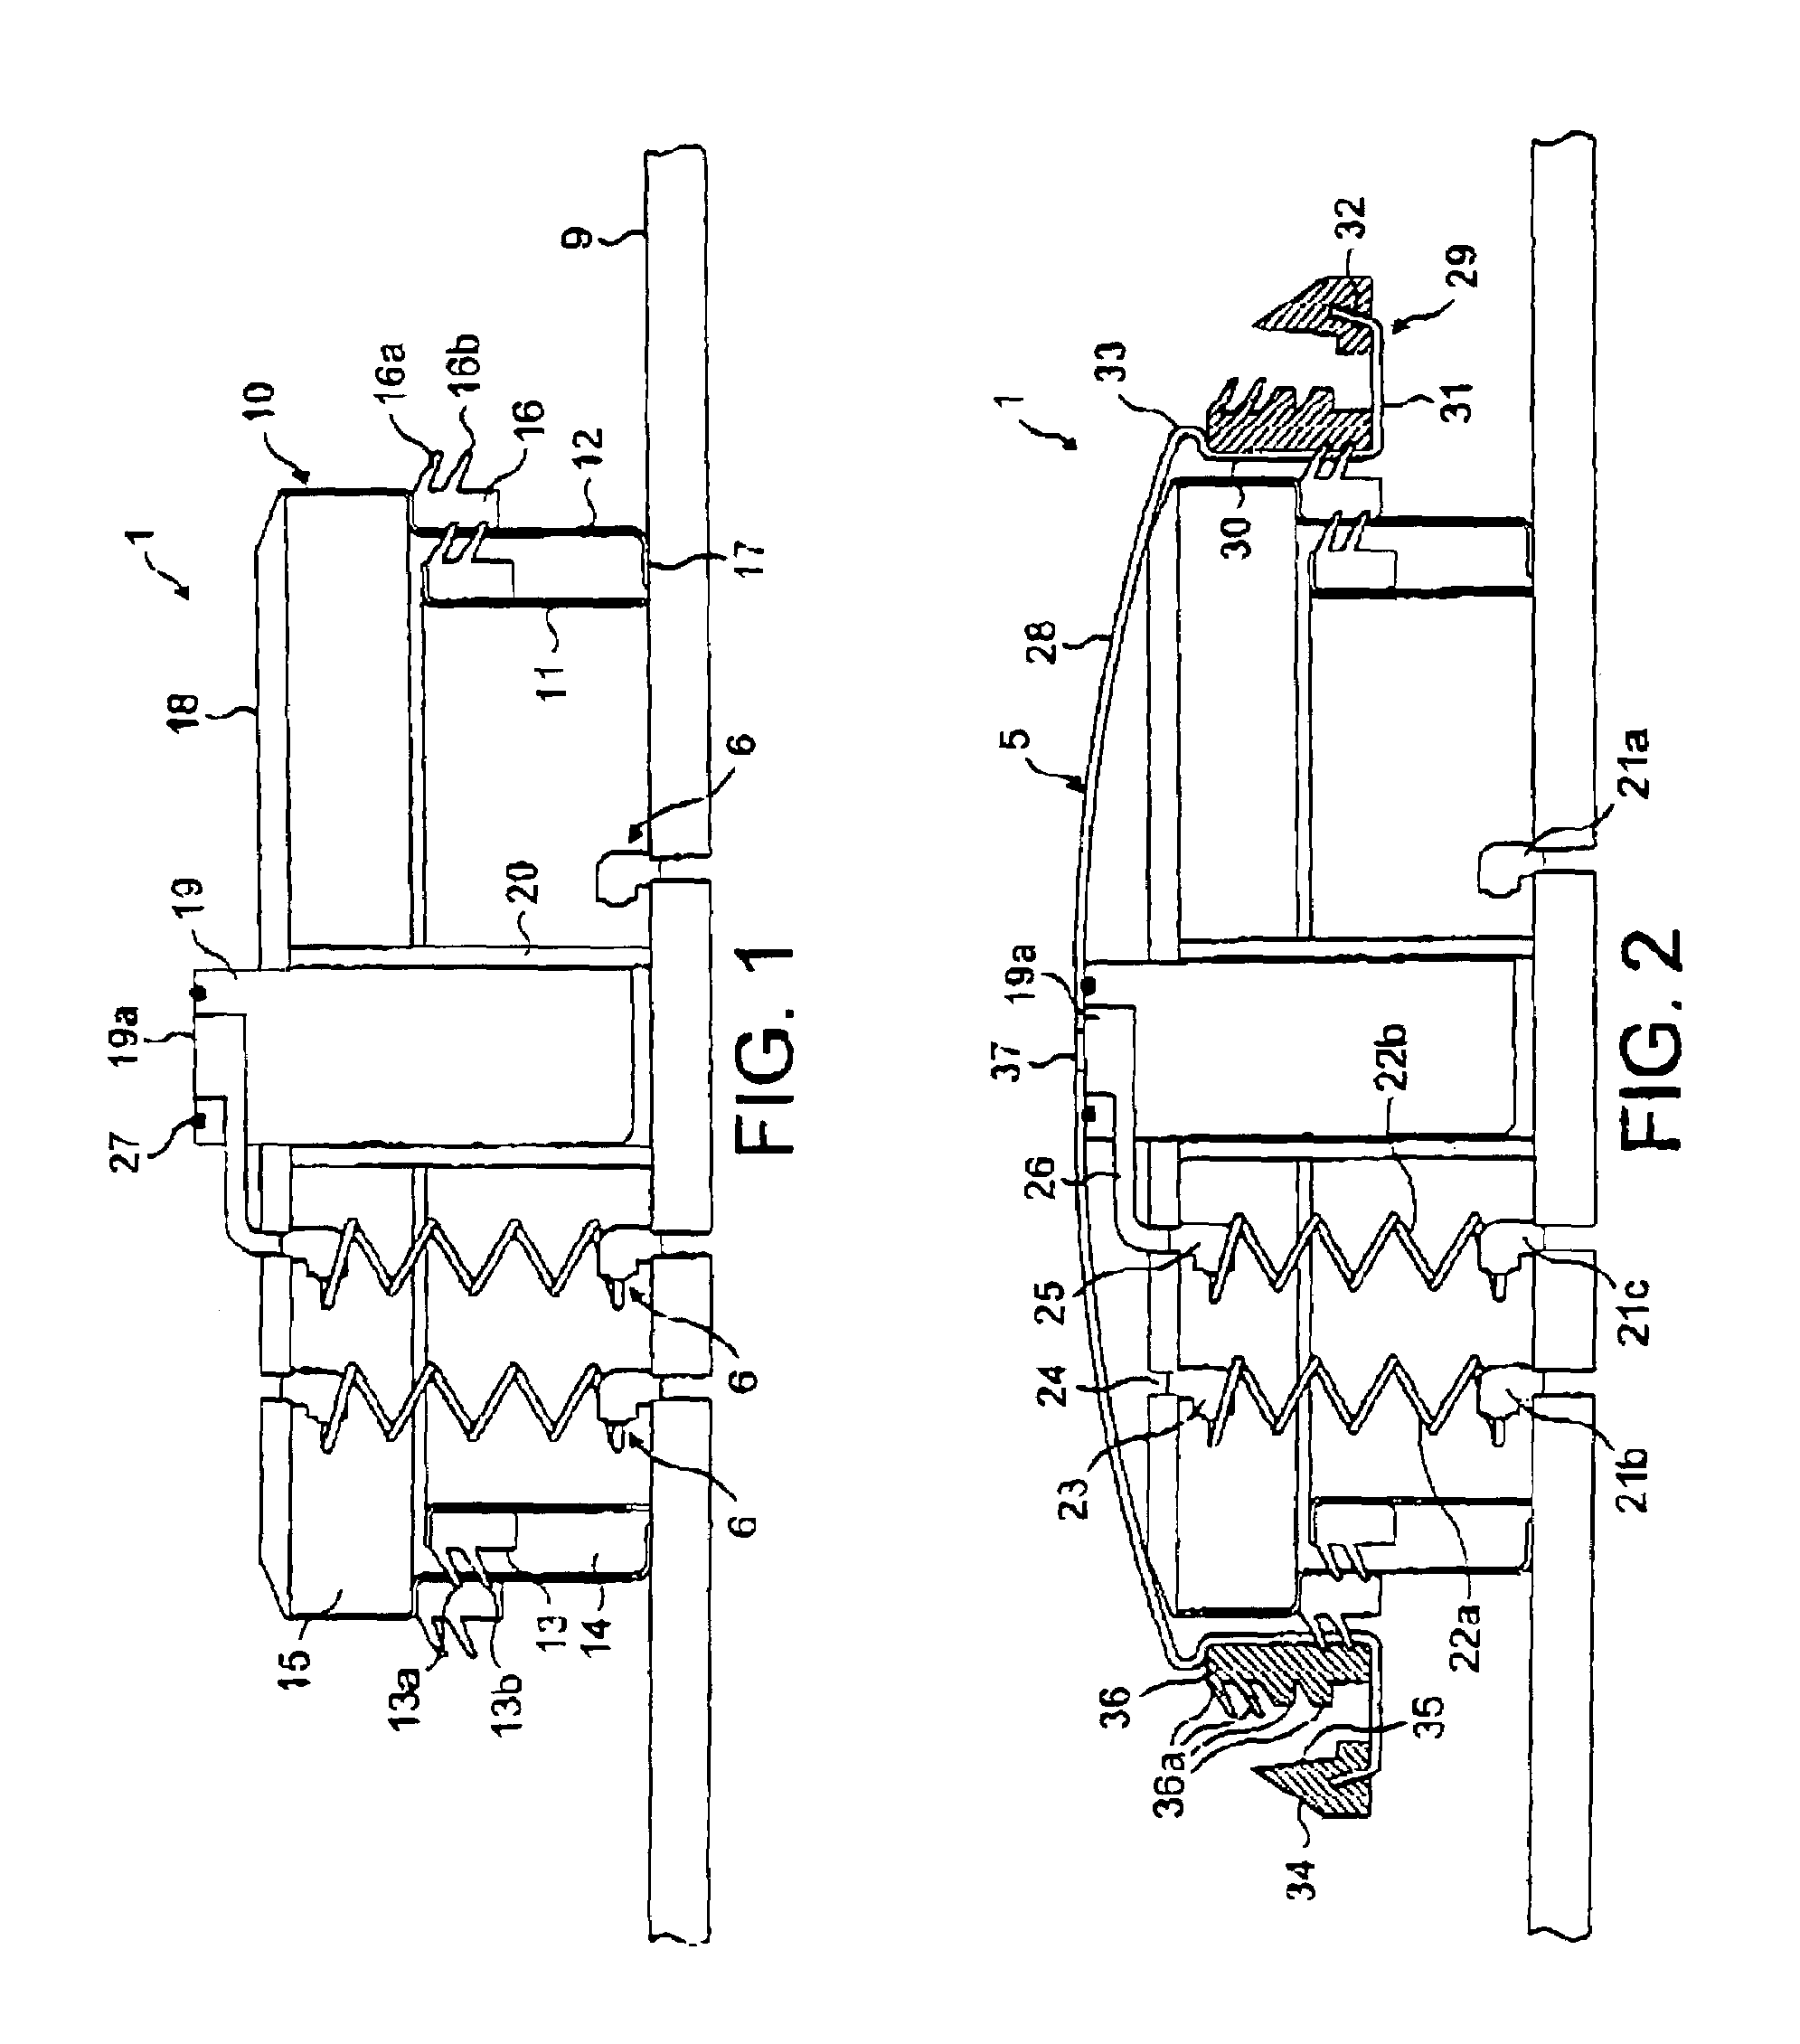 Method and apparatus for securing a closure in an aperture of a container